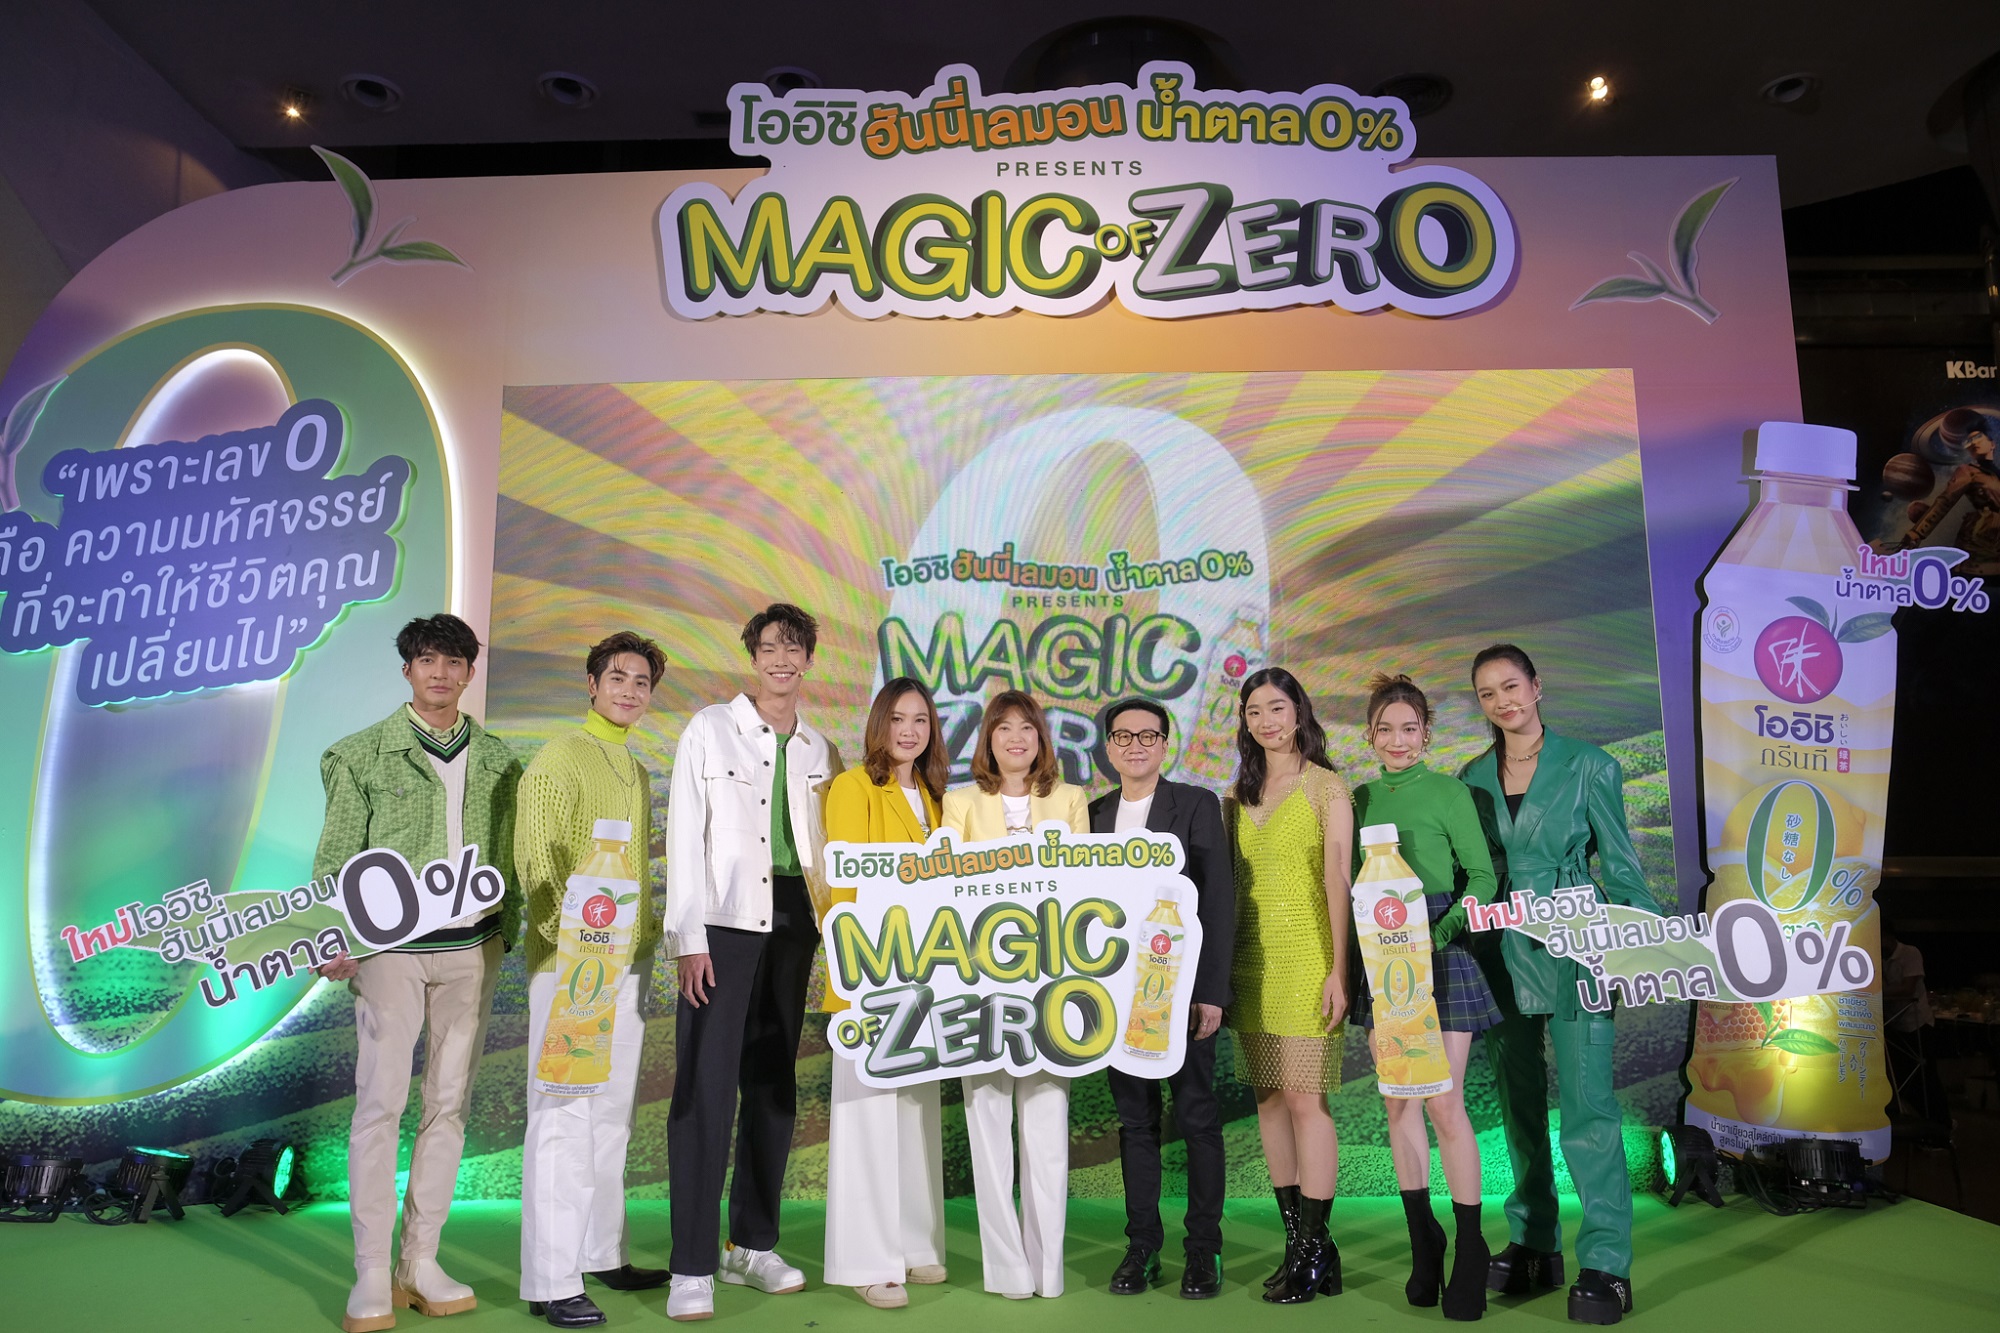 Remarkable and irresistible!  “Oishi Green Tea” collaborated with “GMMTV” to launch a special project “Magic of Zero by Oishi Honey Lemon 0% Sugar”